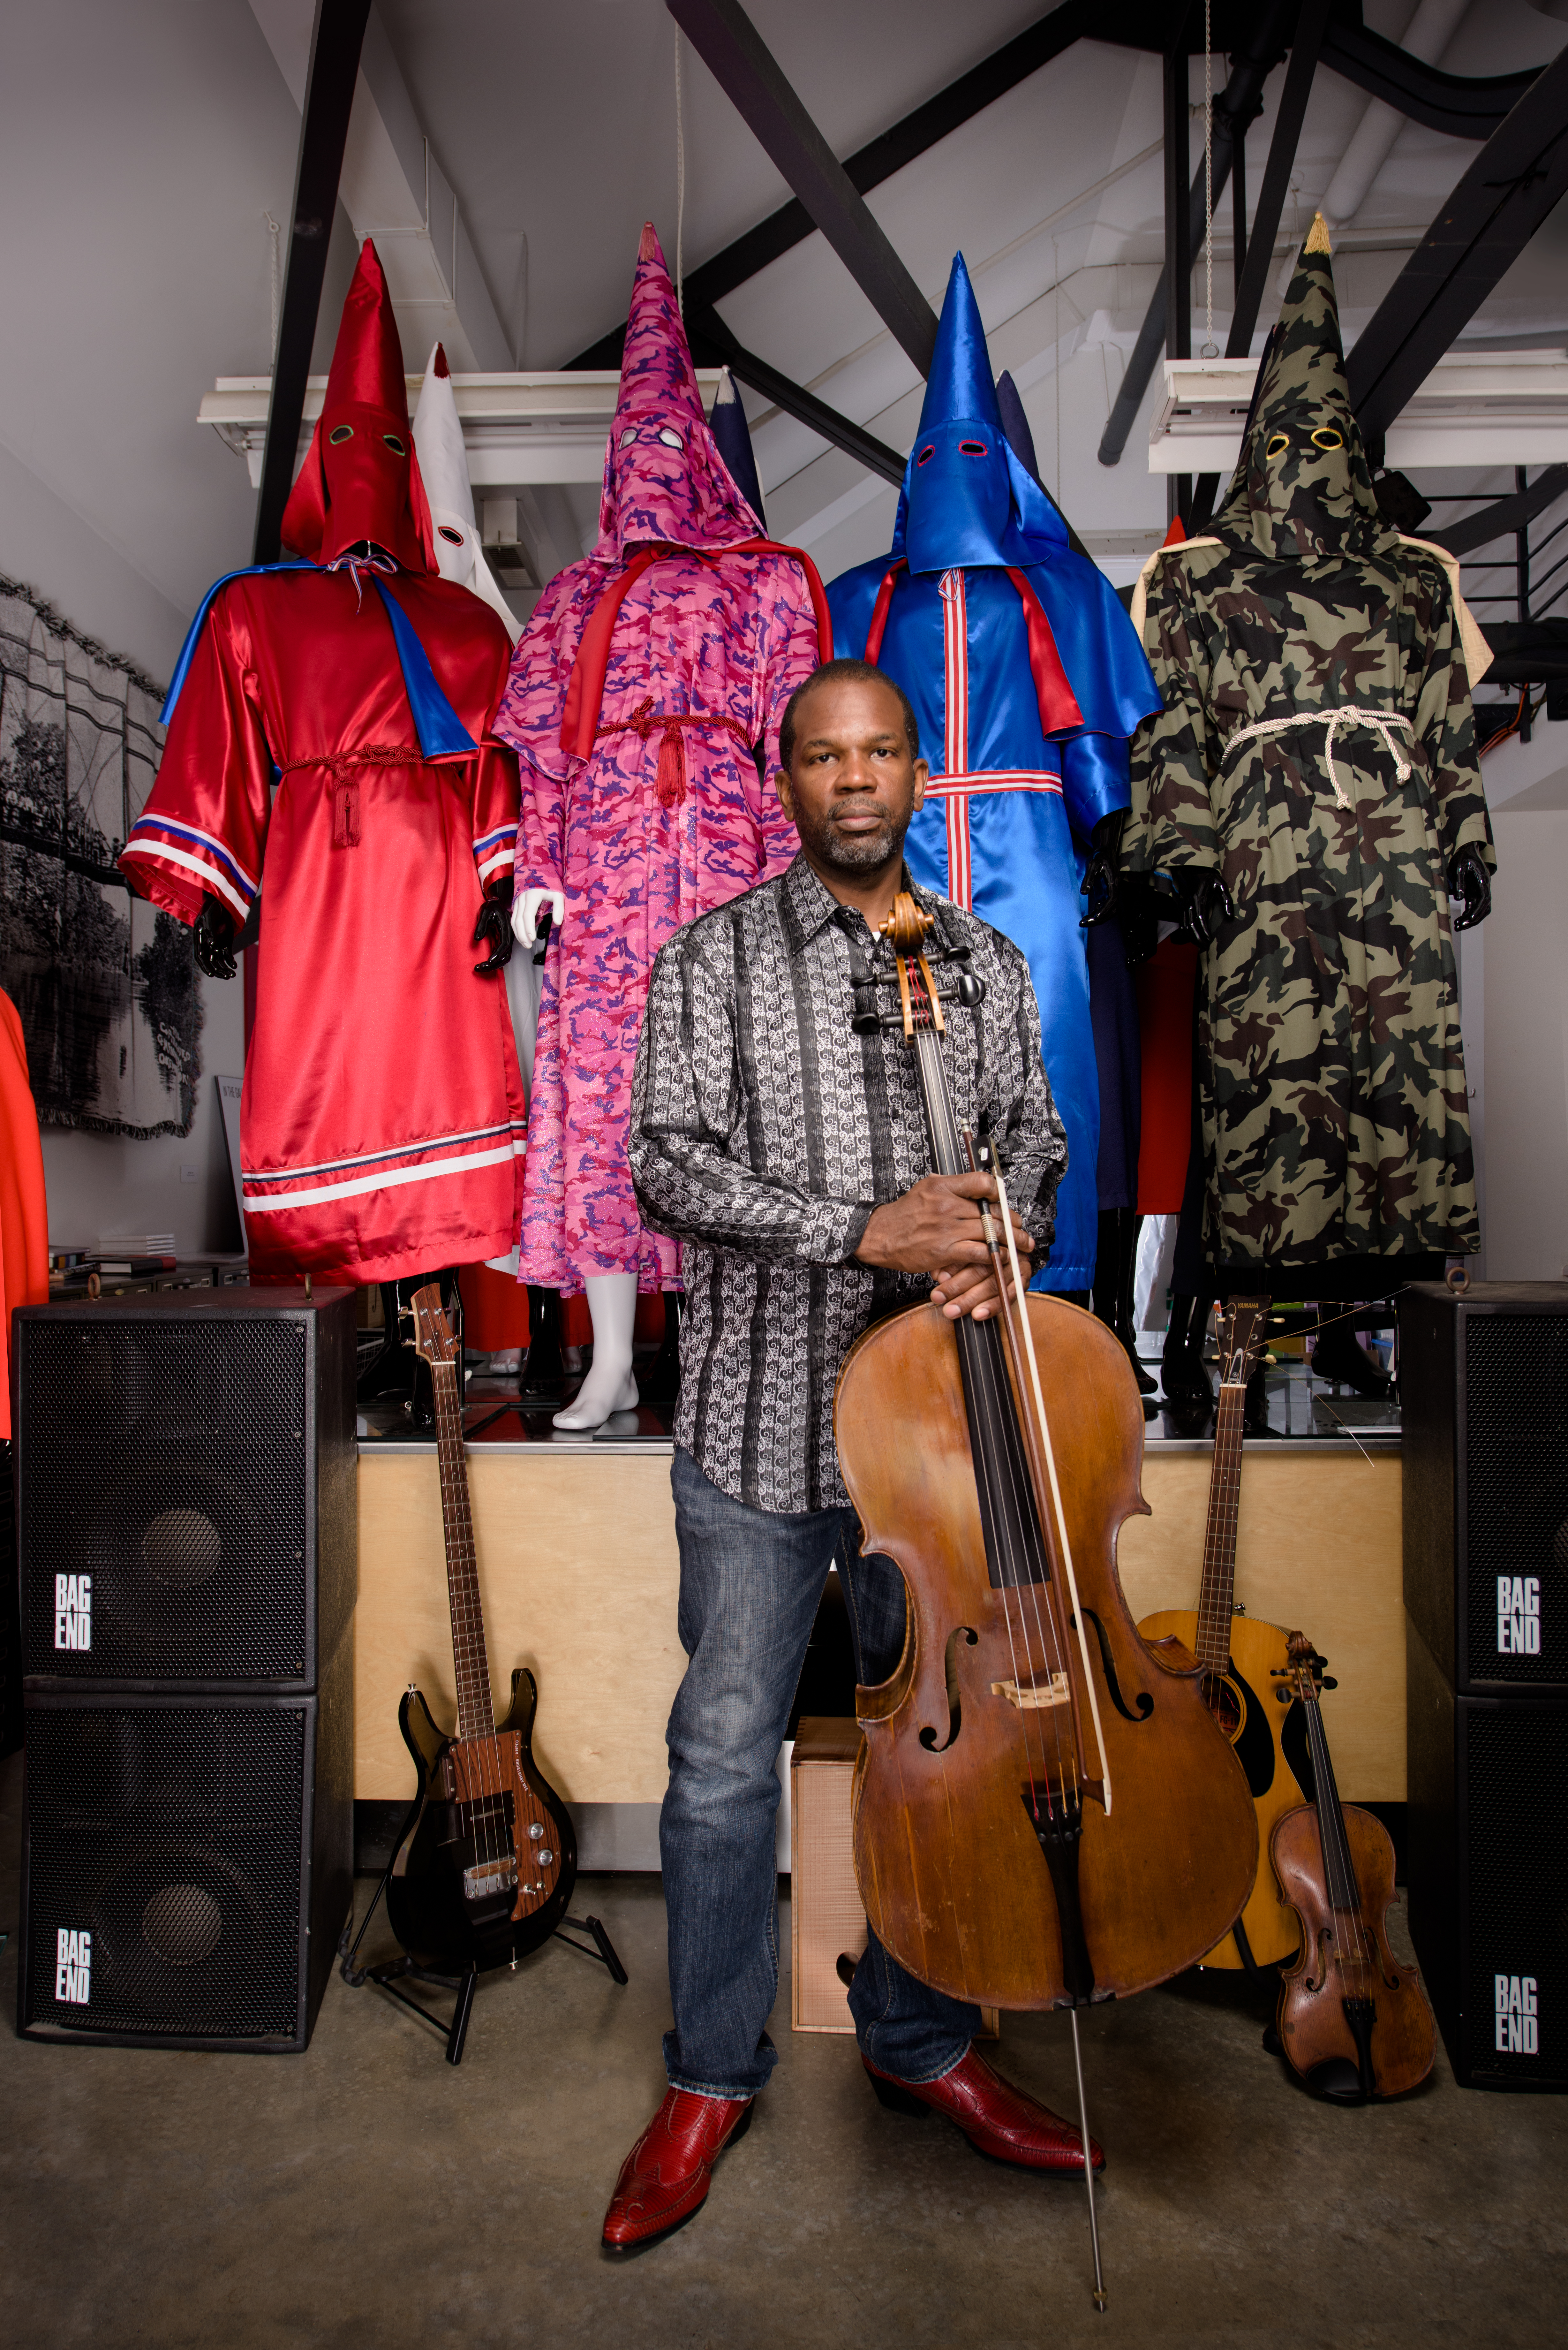 Paul Rucker standing with his cello in front of his art pieces, KKK robes reimagined with multicolored cloth